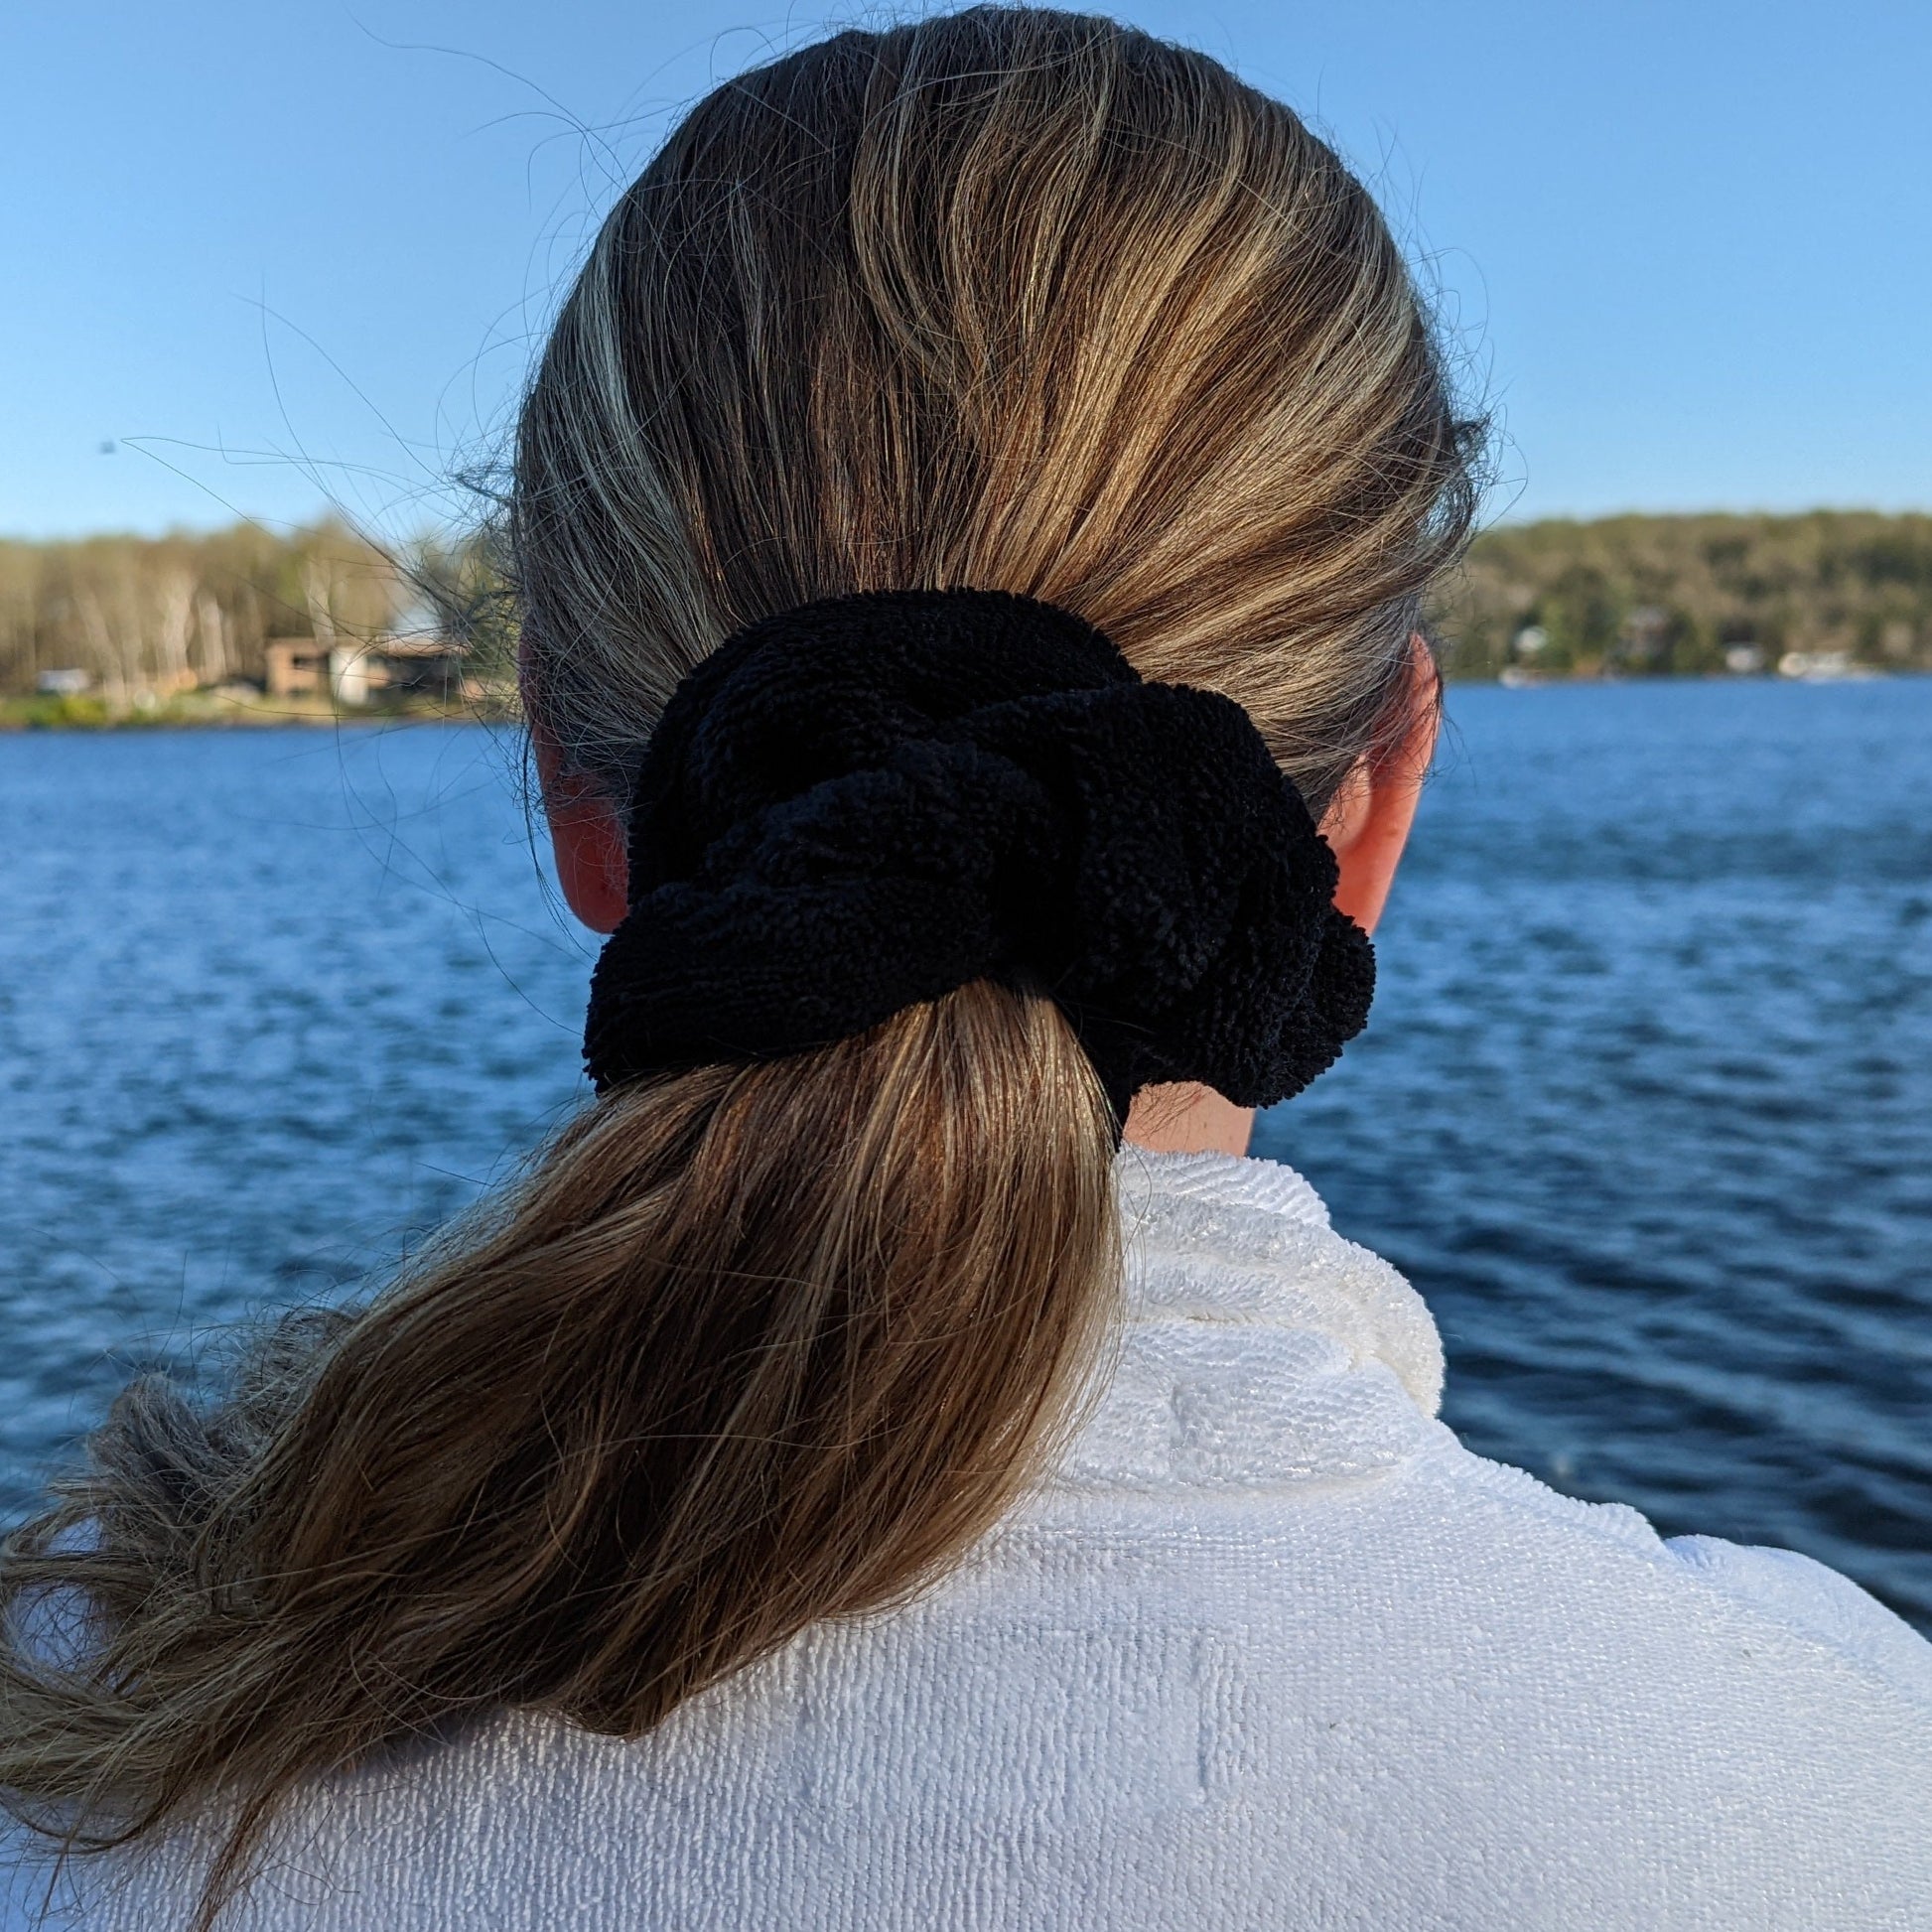 black microfiber scrunchie tied in womens long hair, the lake in the background